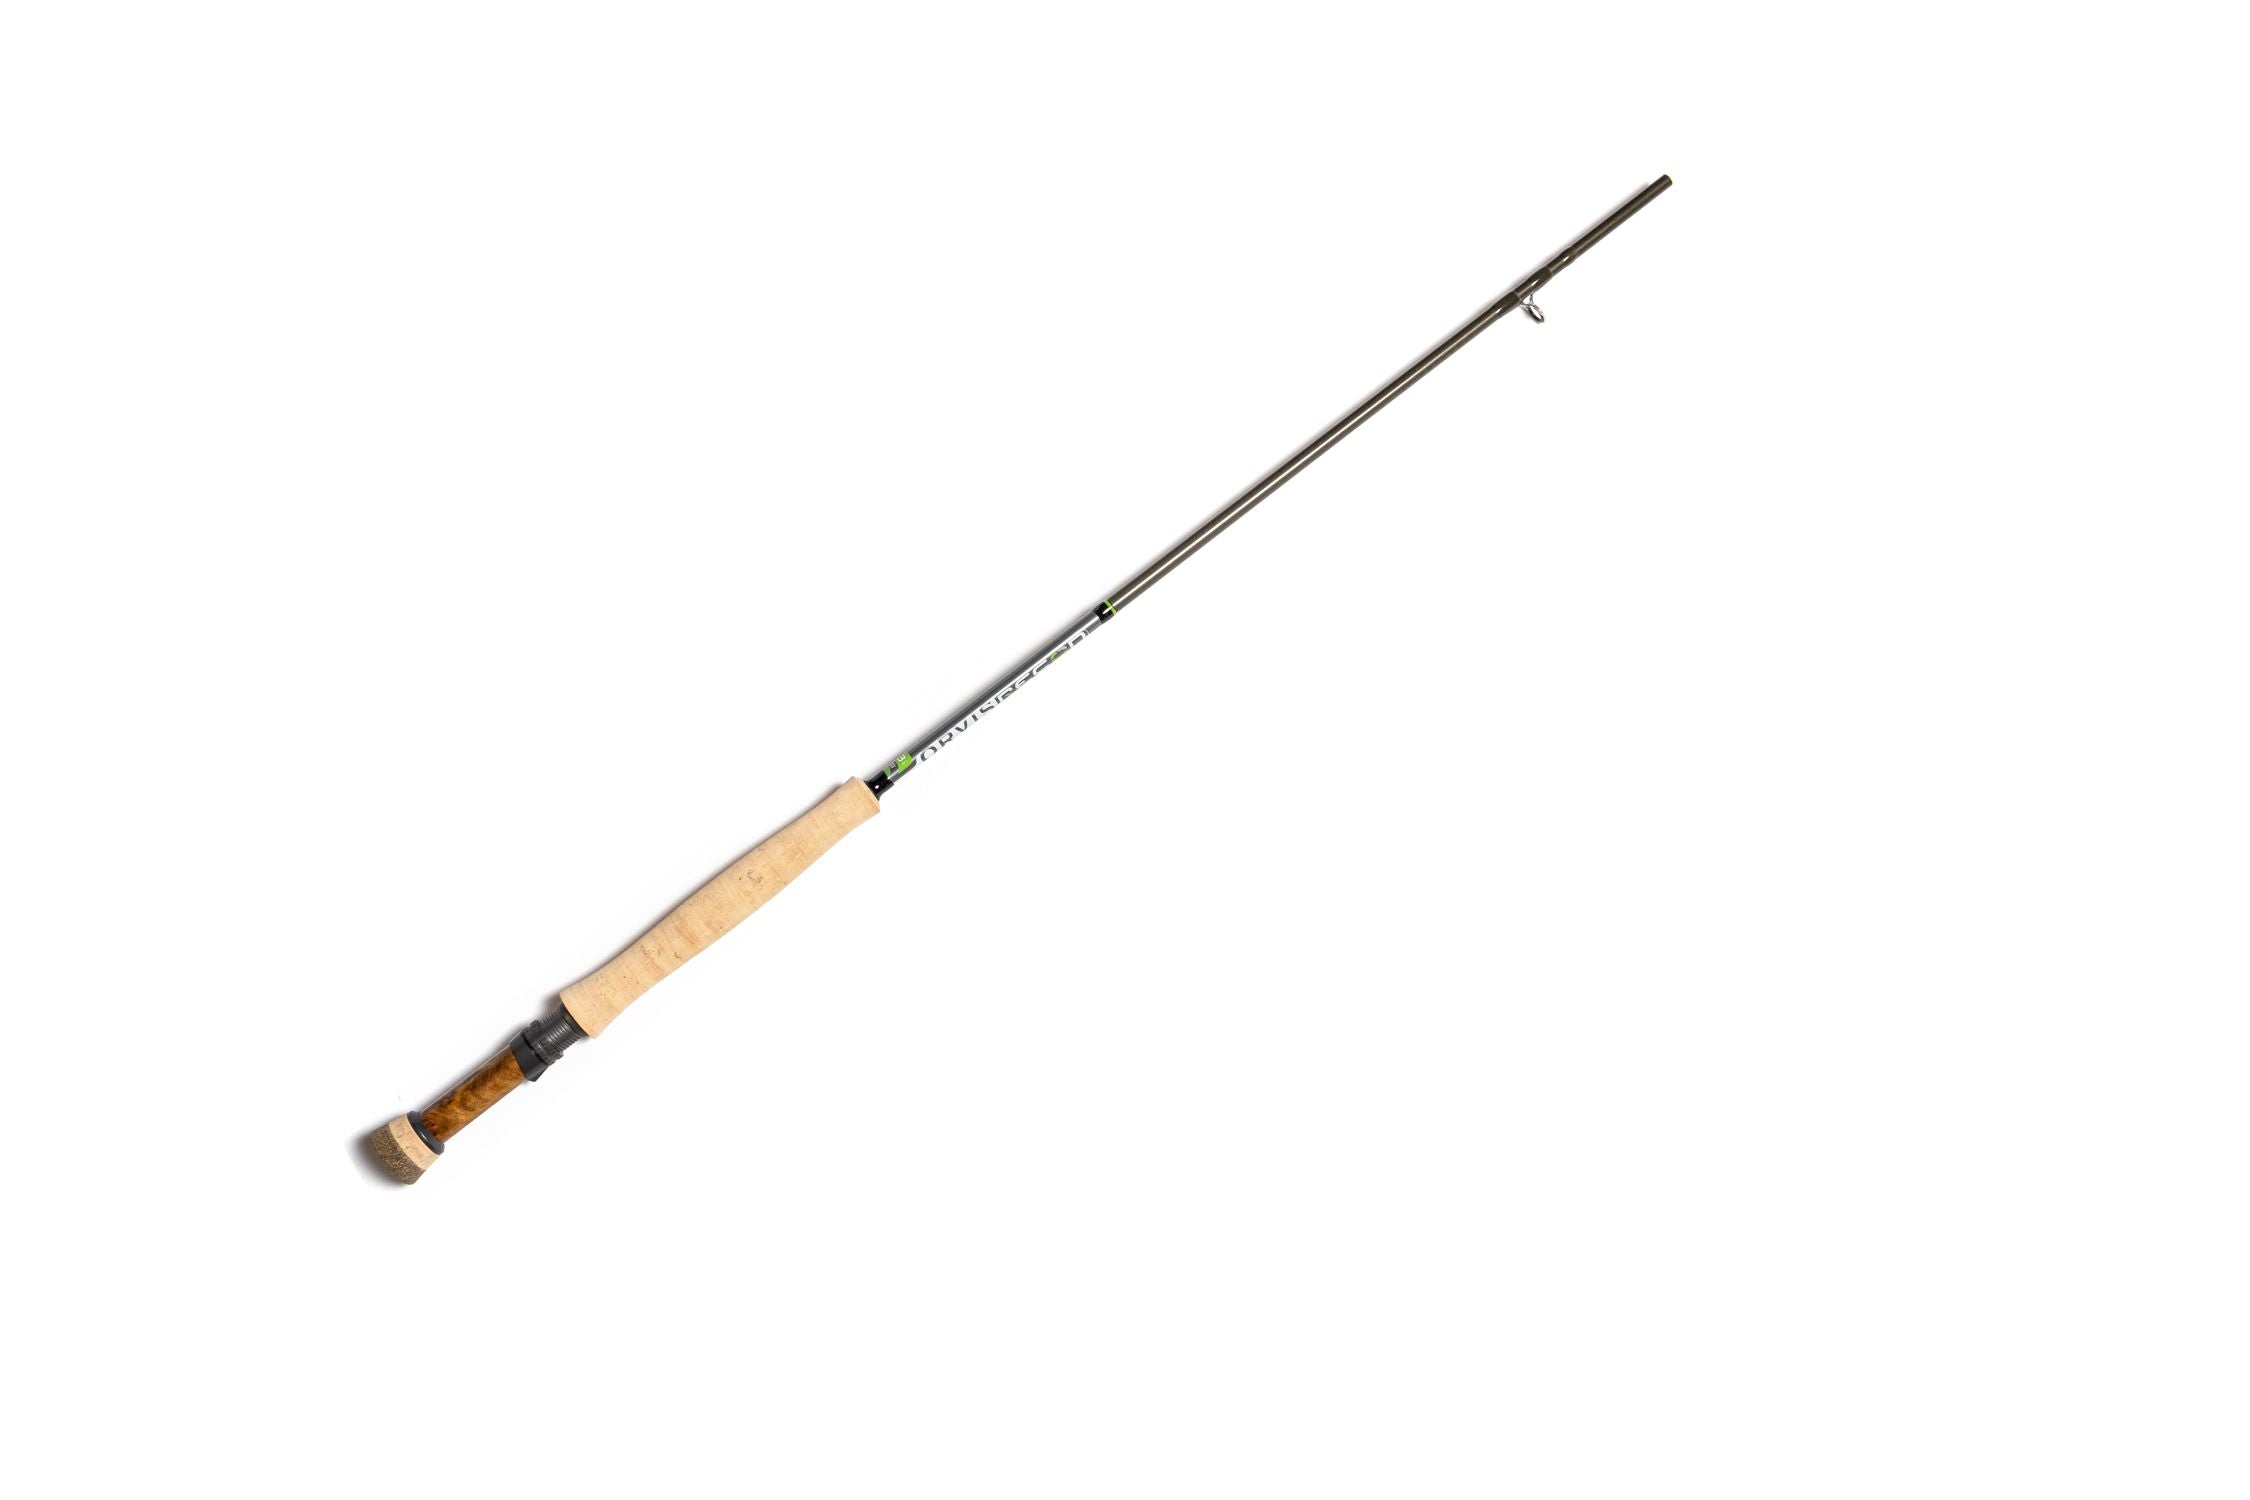 Orvis Recon 103-4 Nymph Fly Rod : 10'0, 3wt